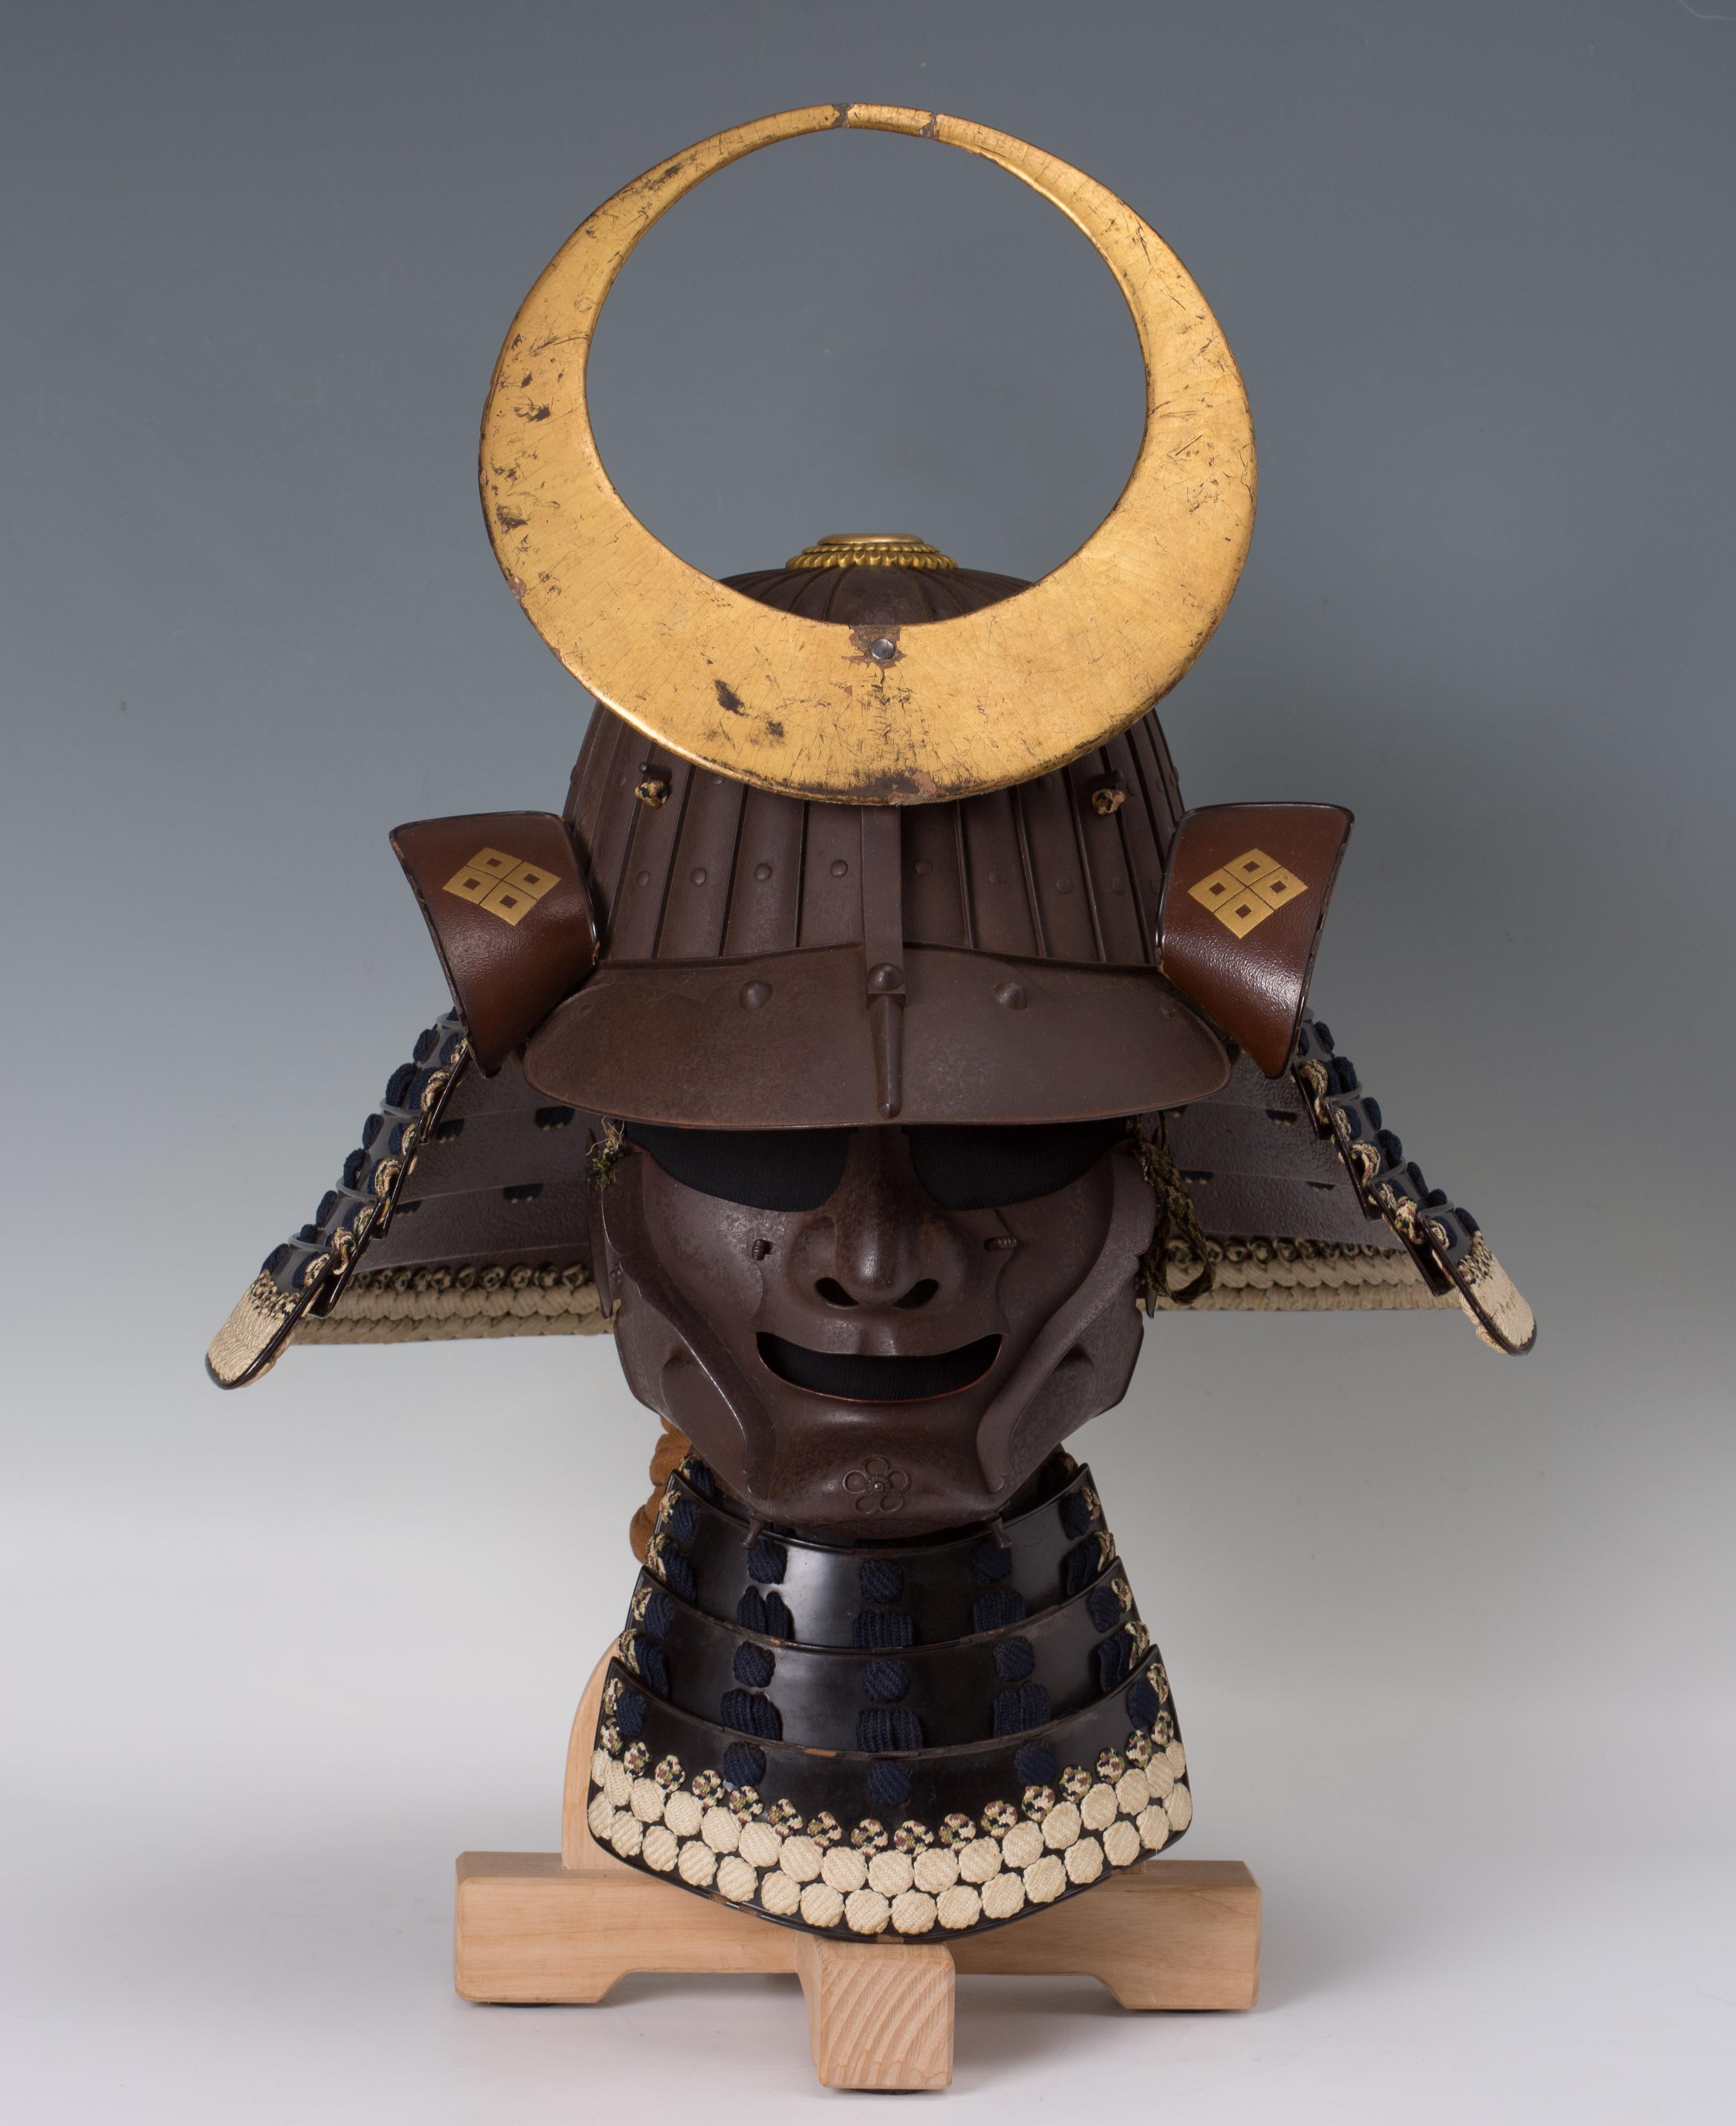 Both helmet and mask signed “Muneharu” with kao.
The helmet with an elegant shape and hammered rivets on view, with a rare construction called “double shell”. With this technique, each plate is in fact strongly curved but then flatten under the